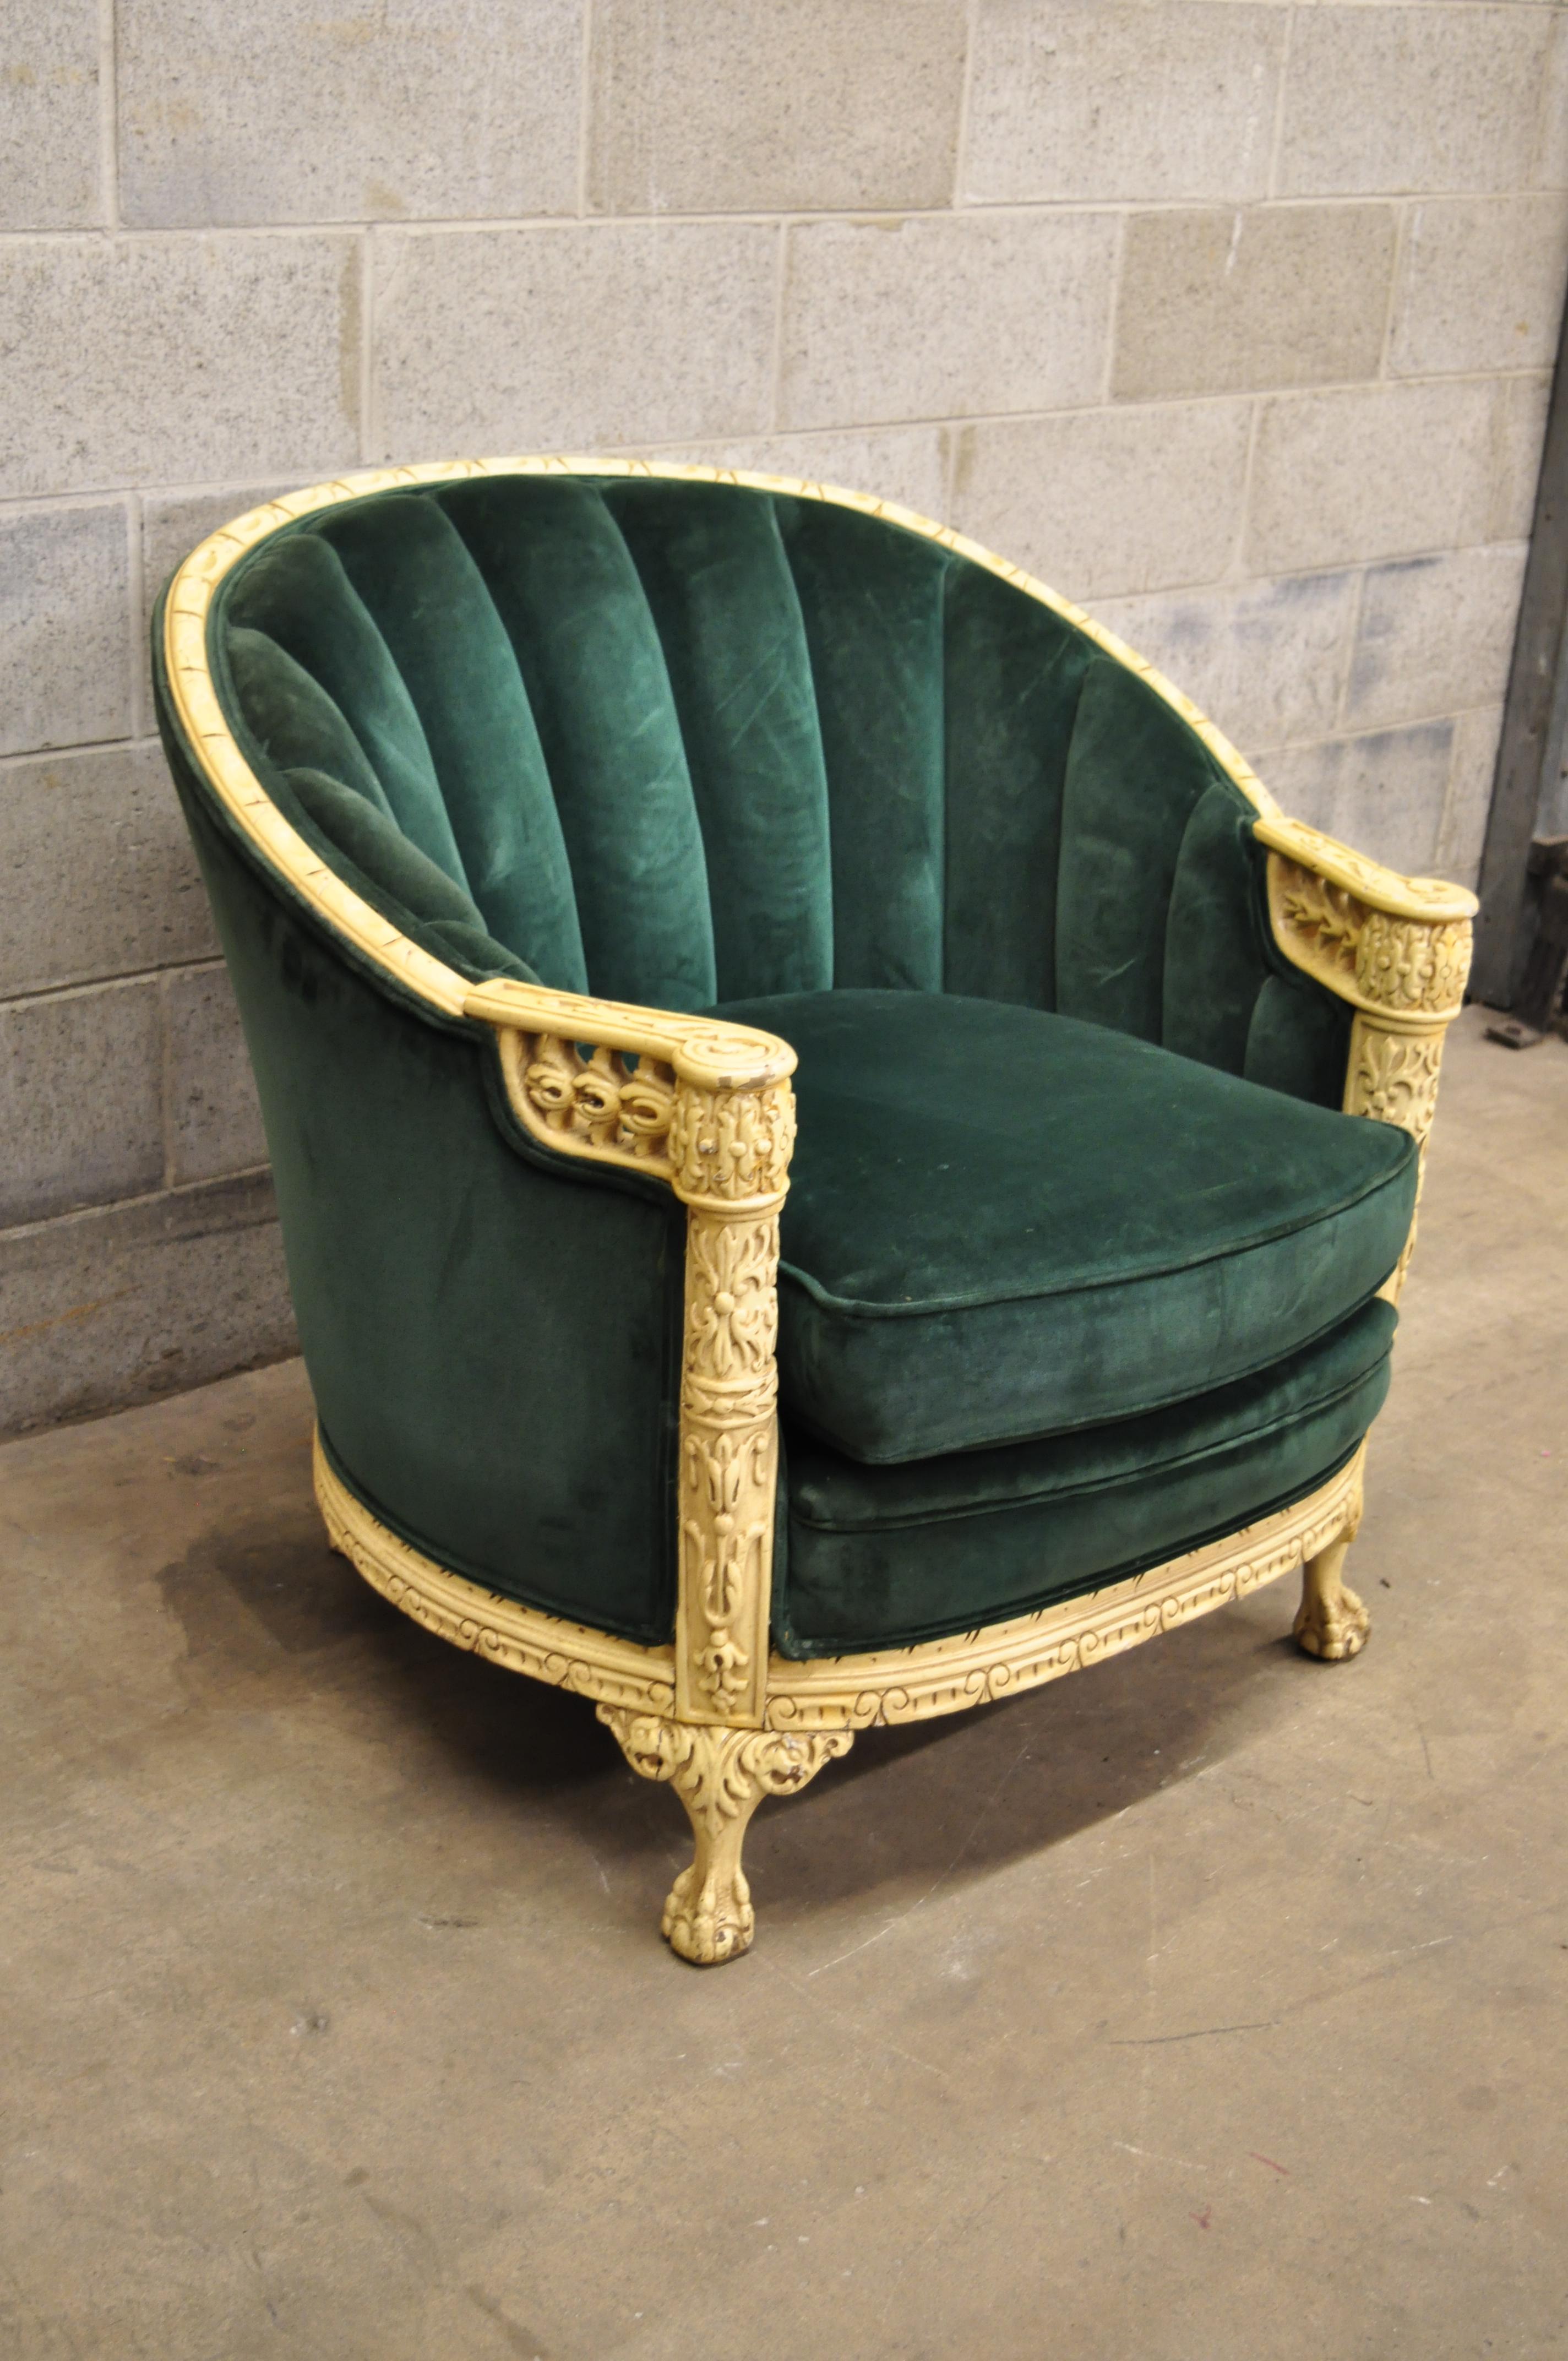 Antique Art Deco green mohair cream painted ball and claw club lounge chair. Item original green mohair upholstery, cream painted finish, barrel back, solid wood frame, nicely carved details, carved ball and claw feet, very nice antique item,